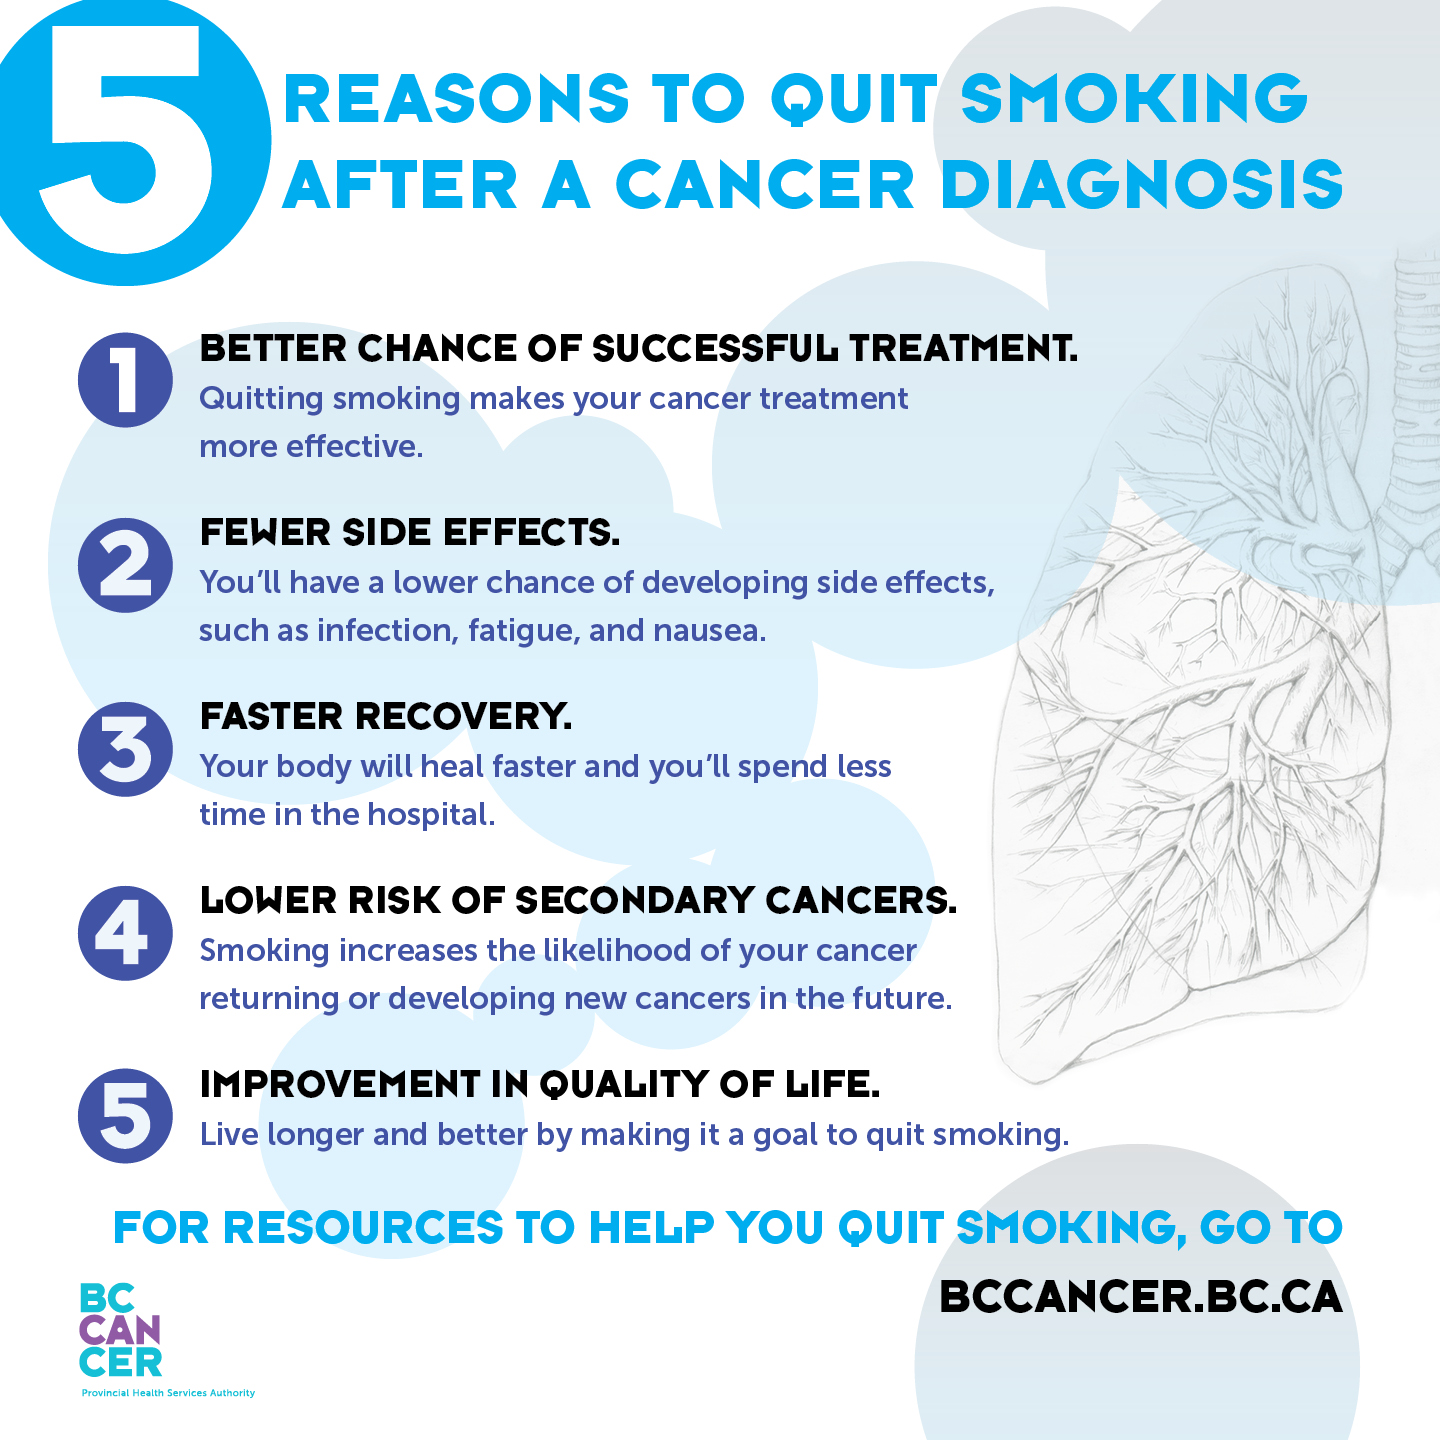 Five reasons to quit smoking after a cancer diagnosis (Infographic by BC Cancer)